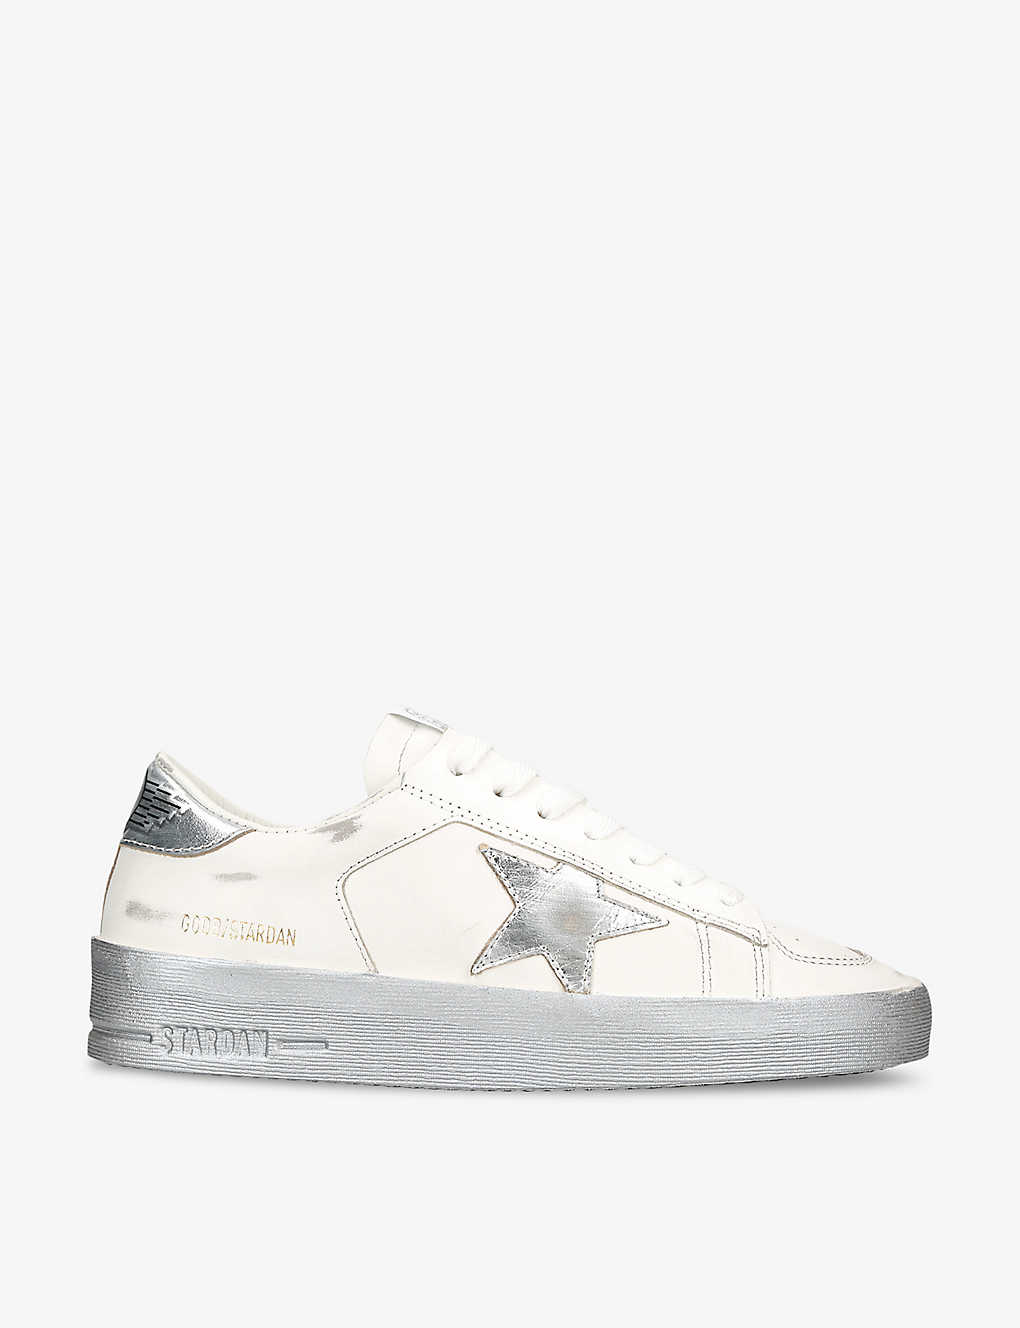 Golden Goose Women's White/oth Women's Stardan 80185 Leather Low-top Trainers